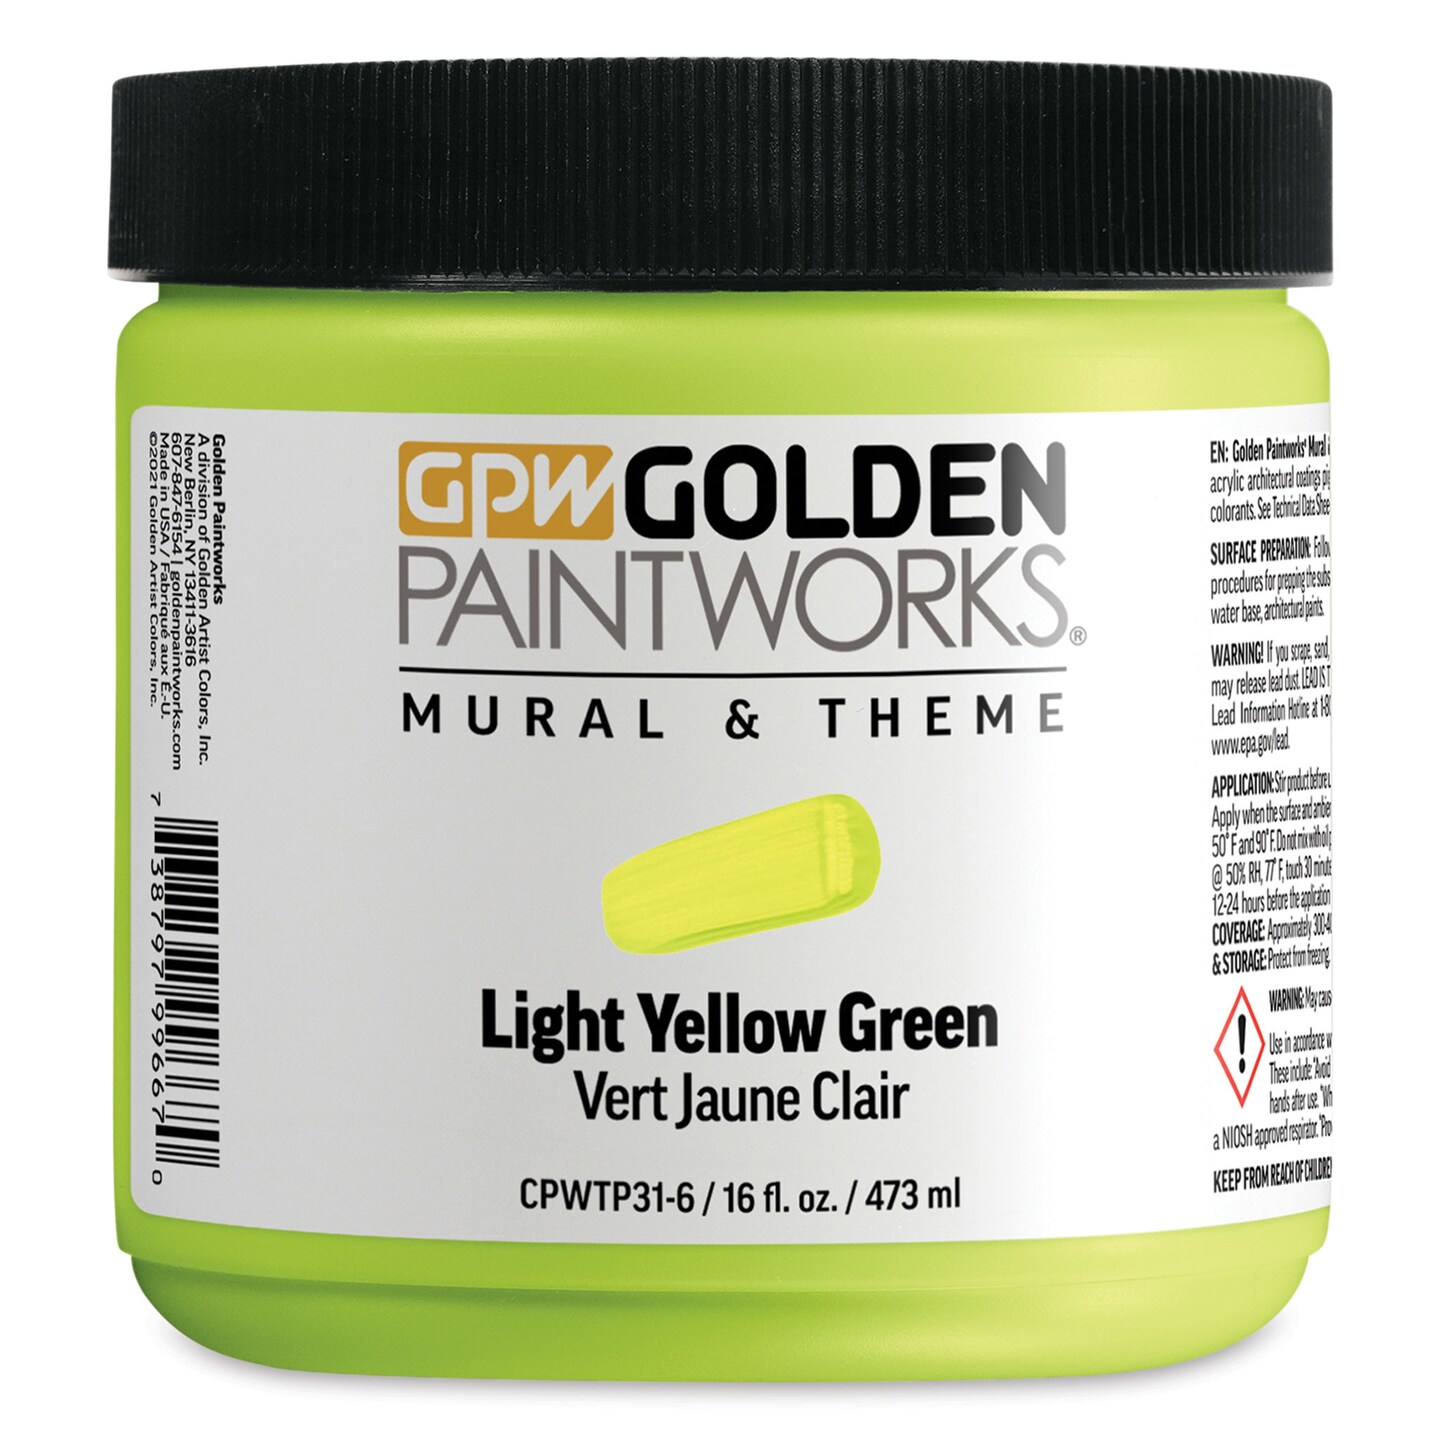 Golden Paintworks Mural and Theme Acrylic Paint - Light Yellow Green, 16 oz, Jar